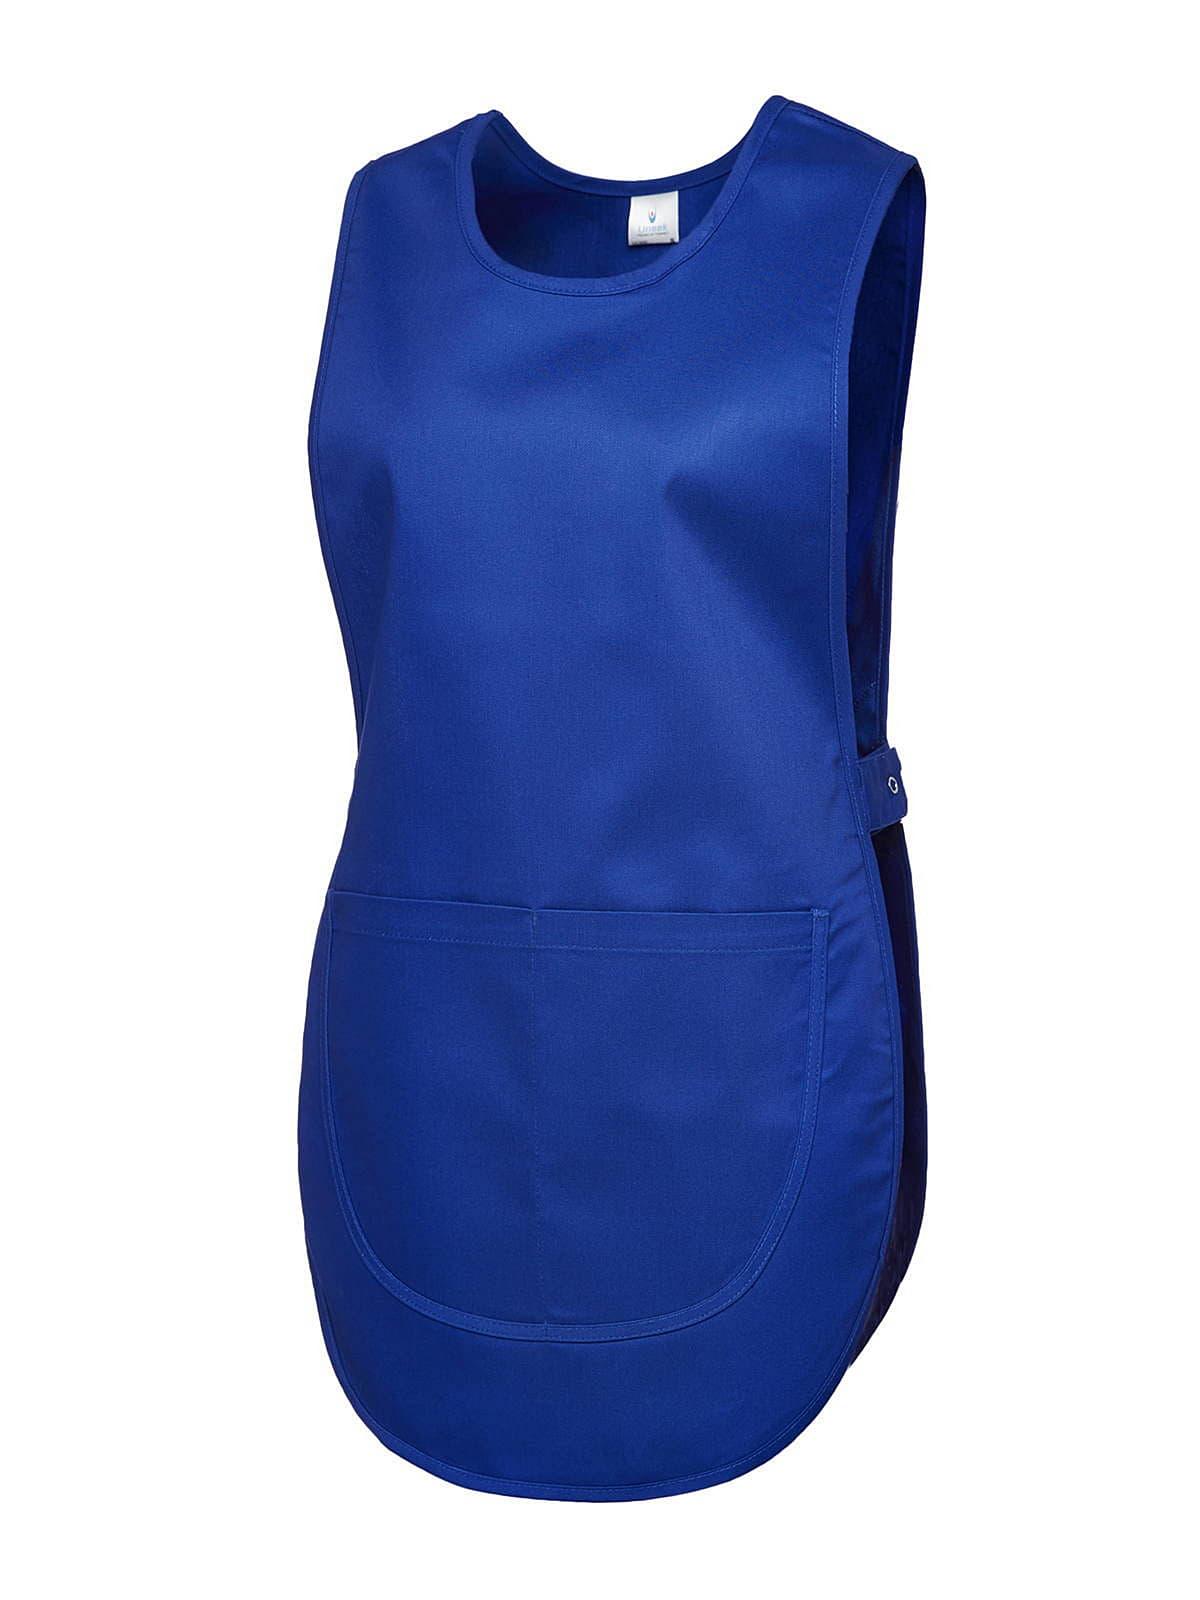 Uneek Premium Tabard in Royal Blue (Product Code: UC920)